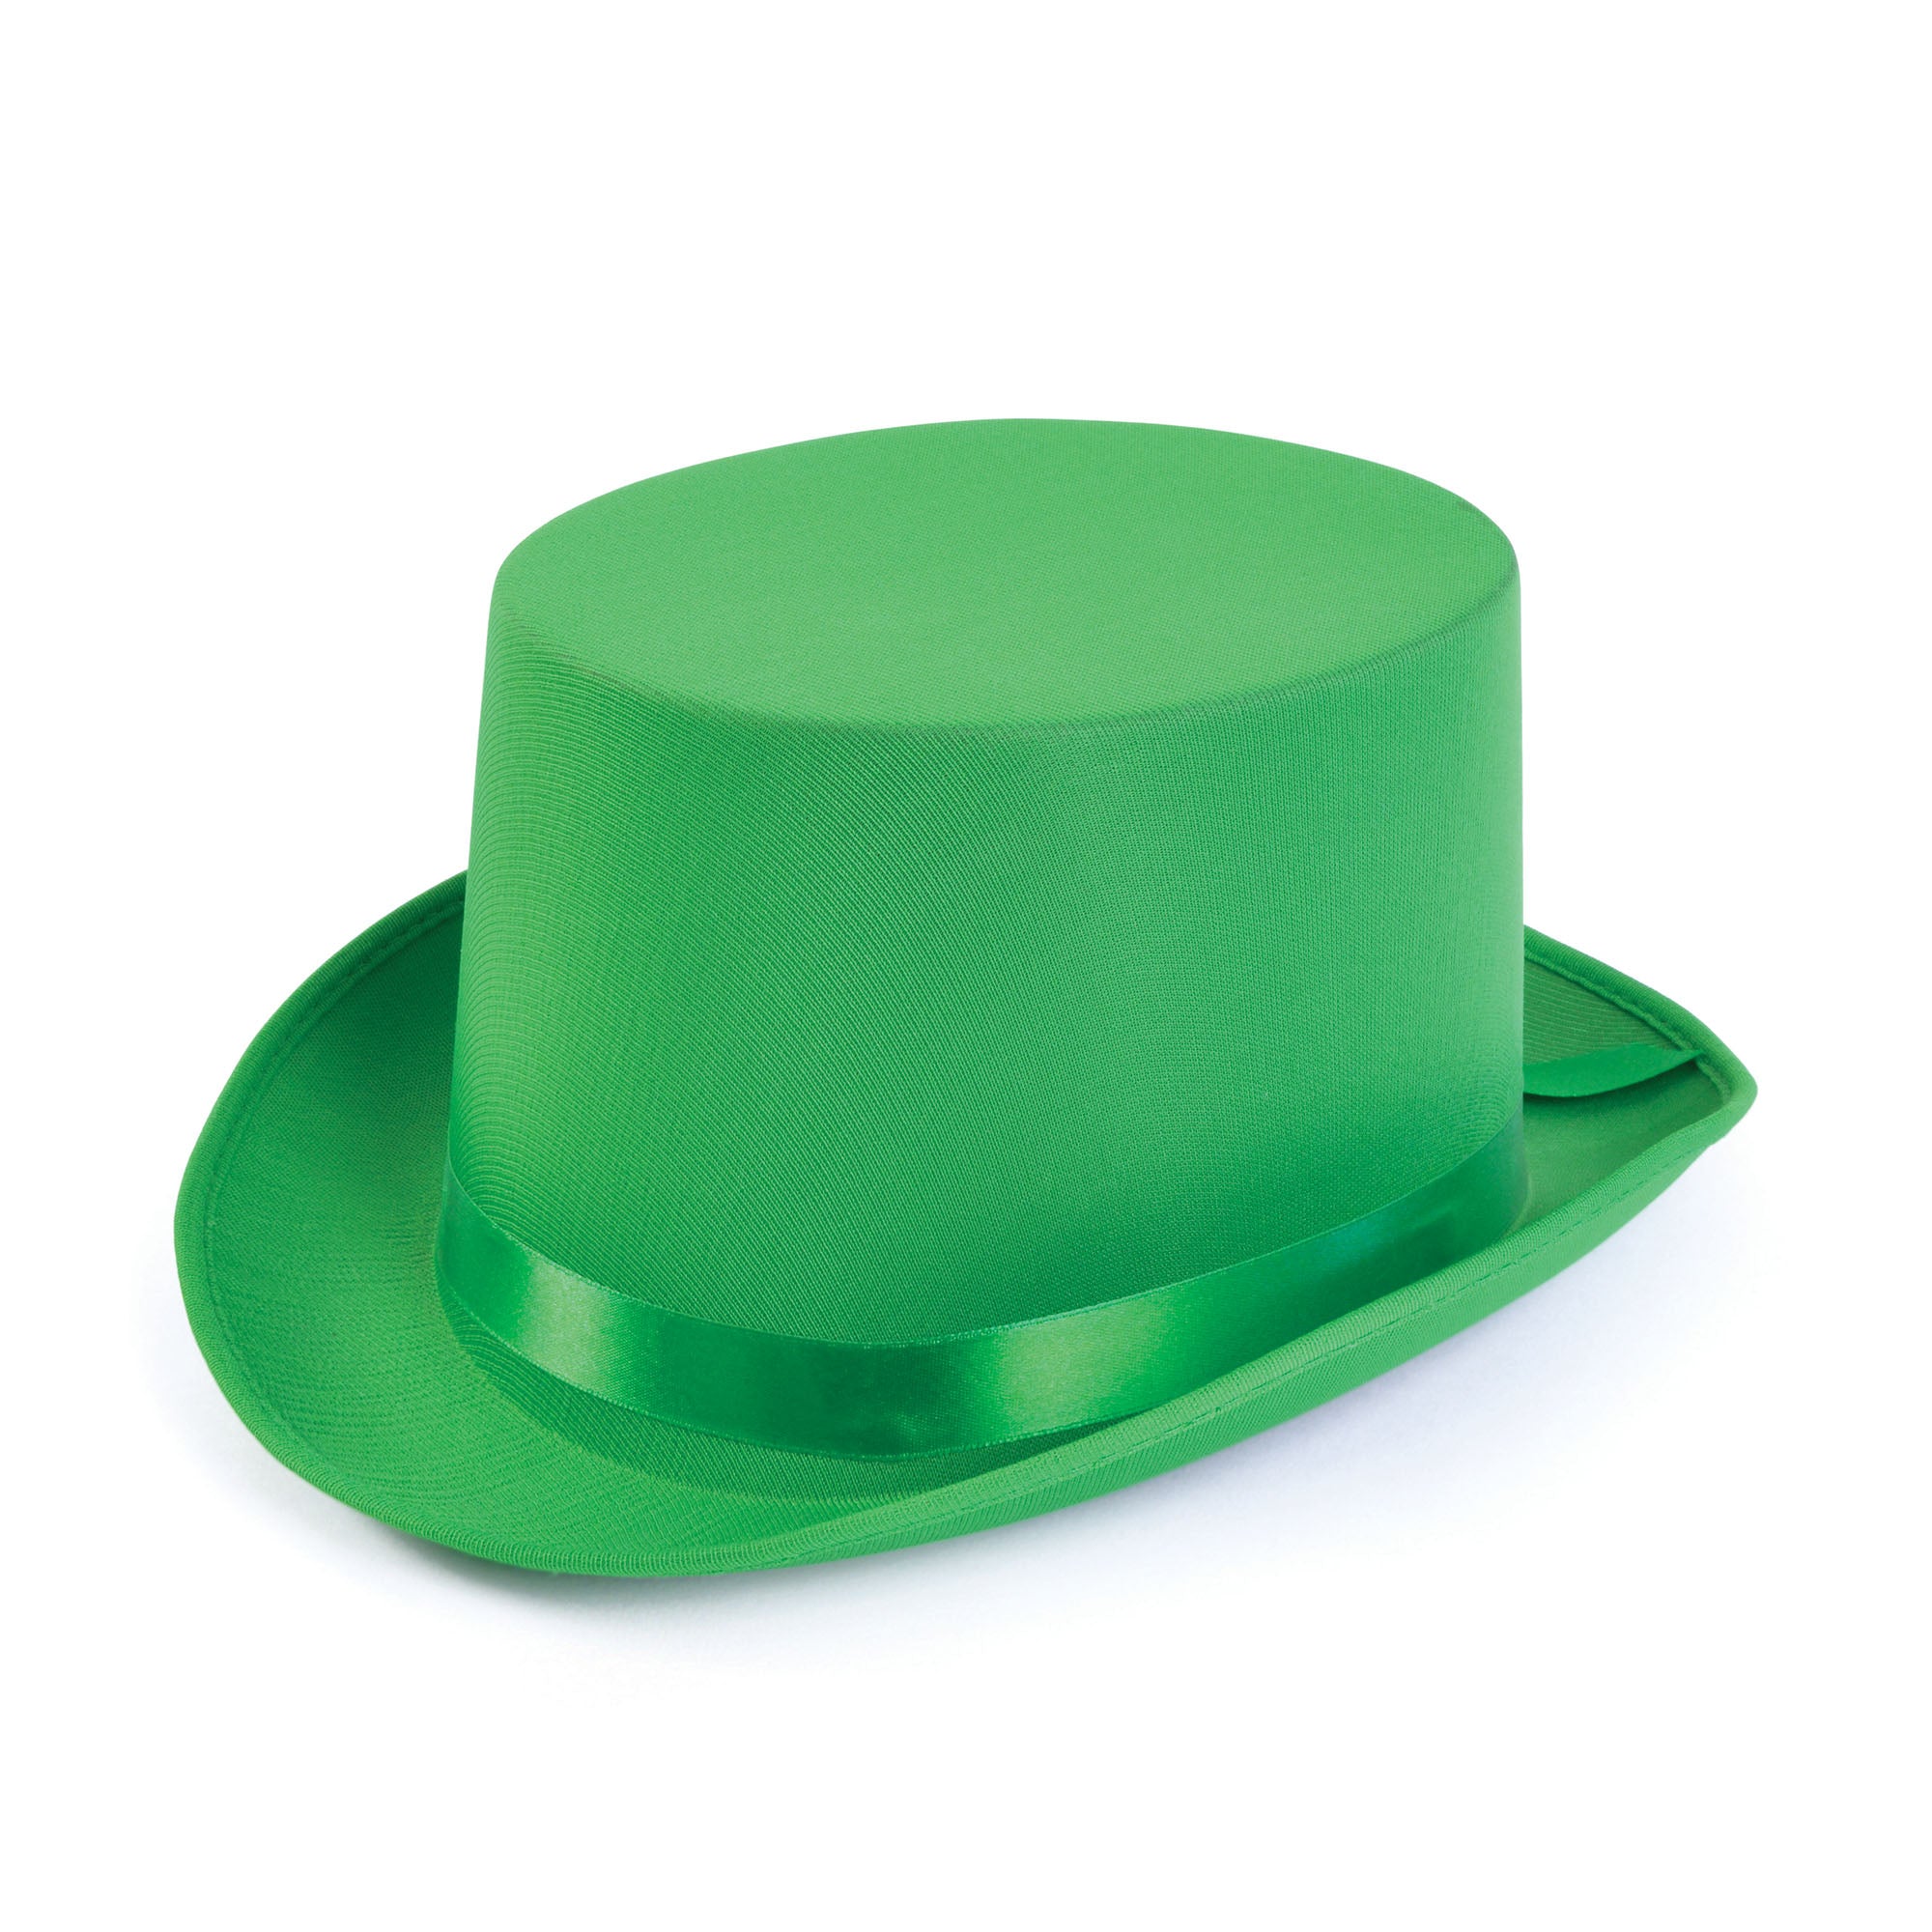 Green Top Hat with Satin finish